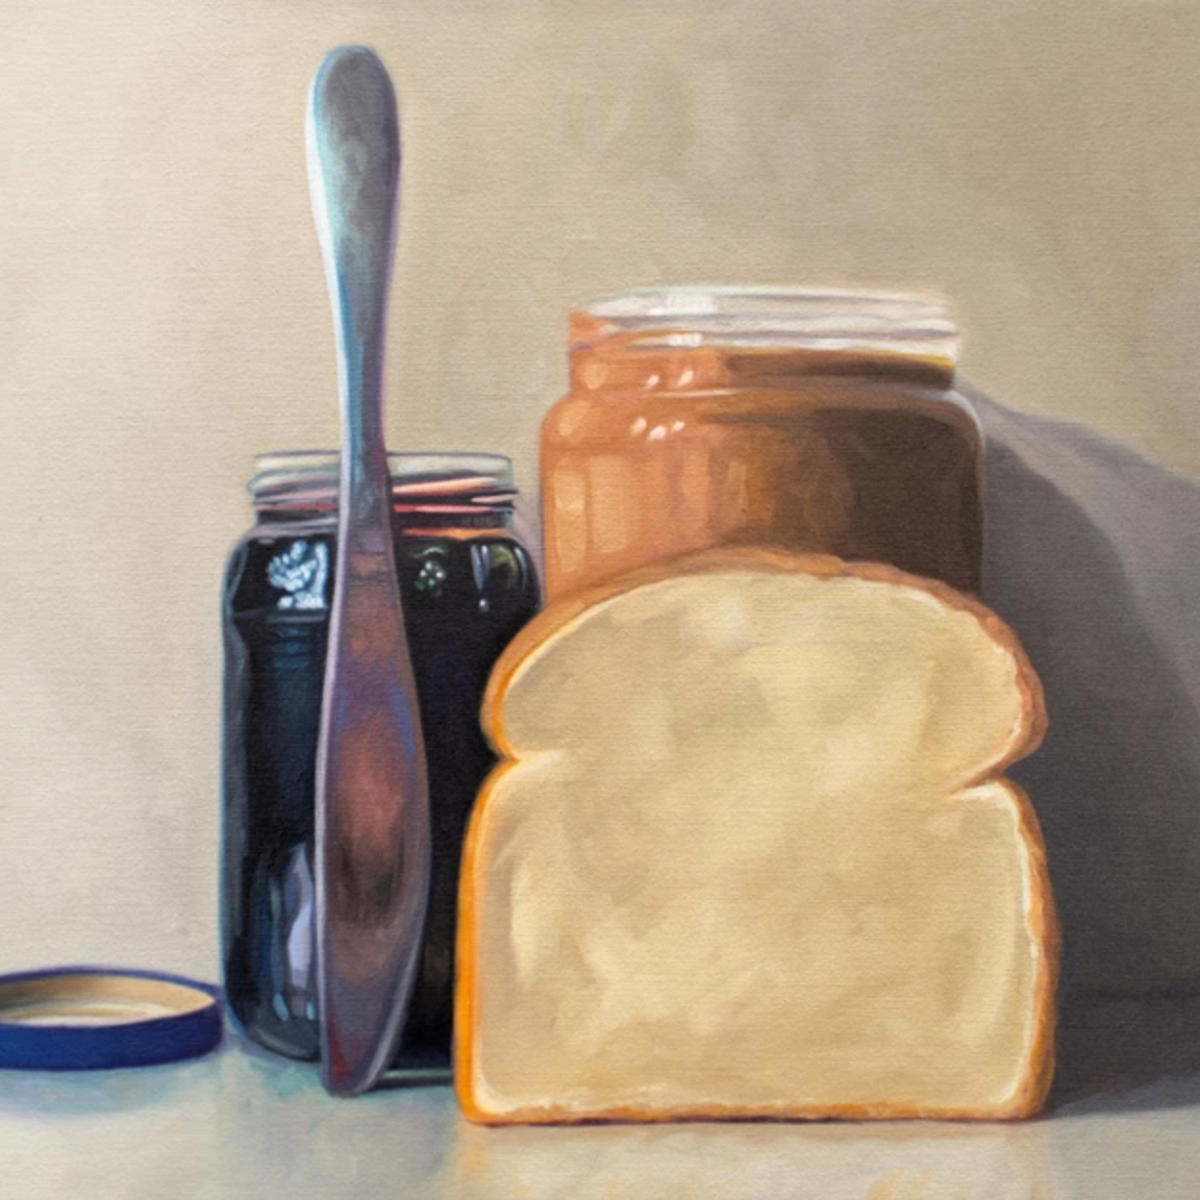 All the things required to make a peanut butter and jelly sandwich lined up and ready to go on a light and neutral backdrop with subtle reflections.